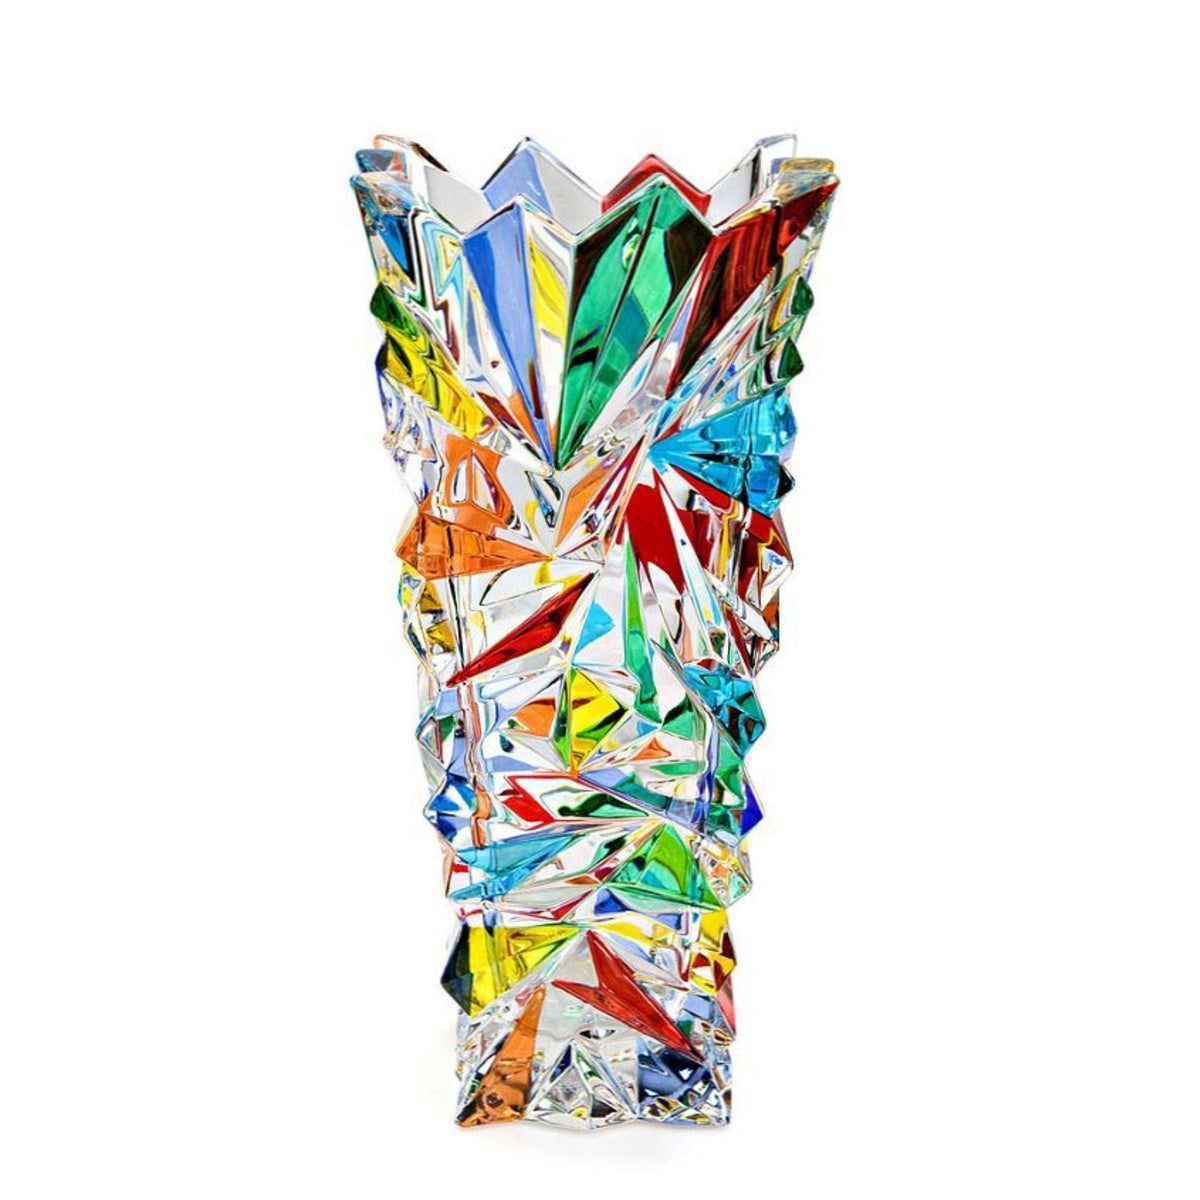 Bolt, Murano Glass Large Painted Vase, Made in Italy at MyItalianDecor